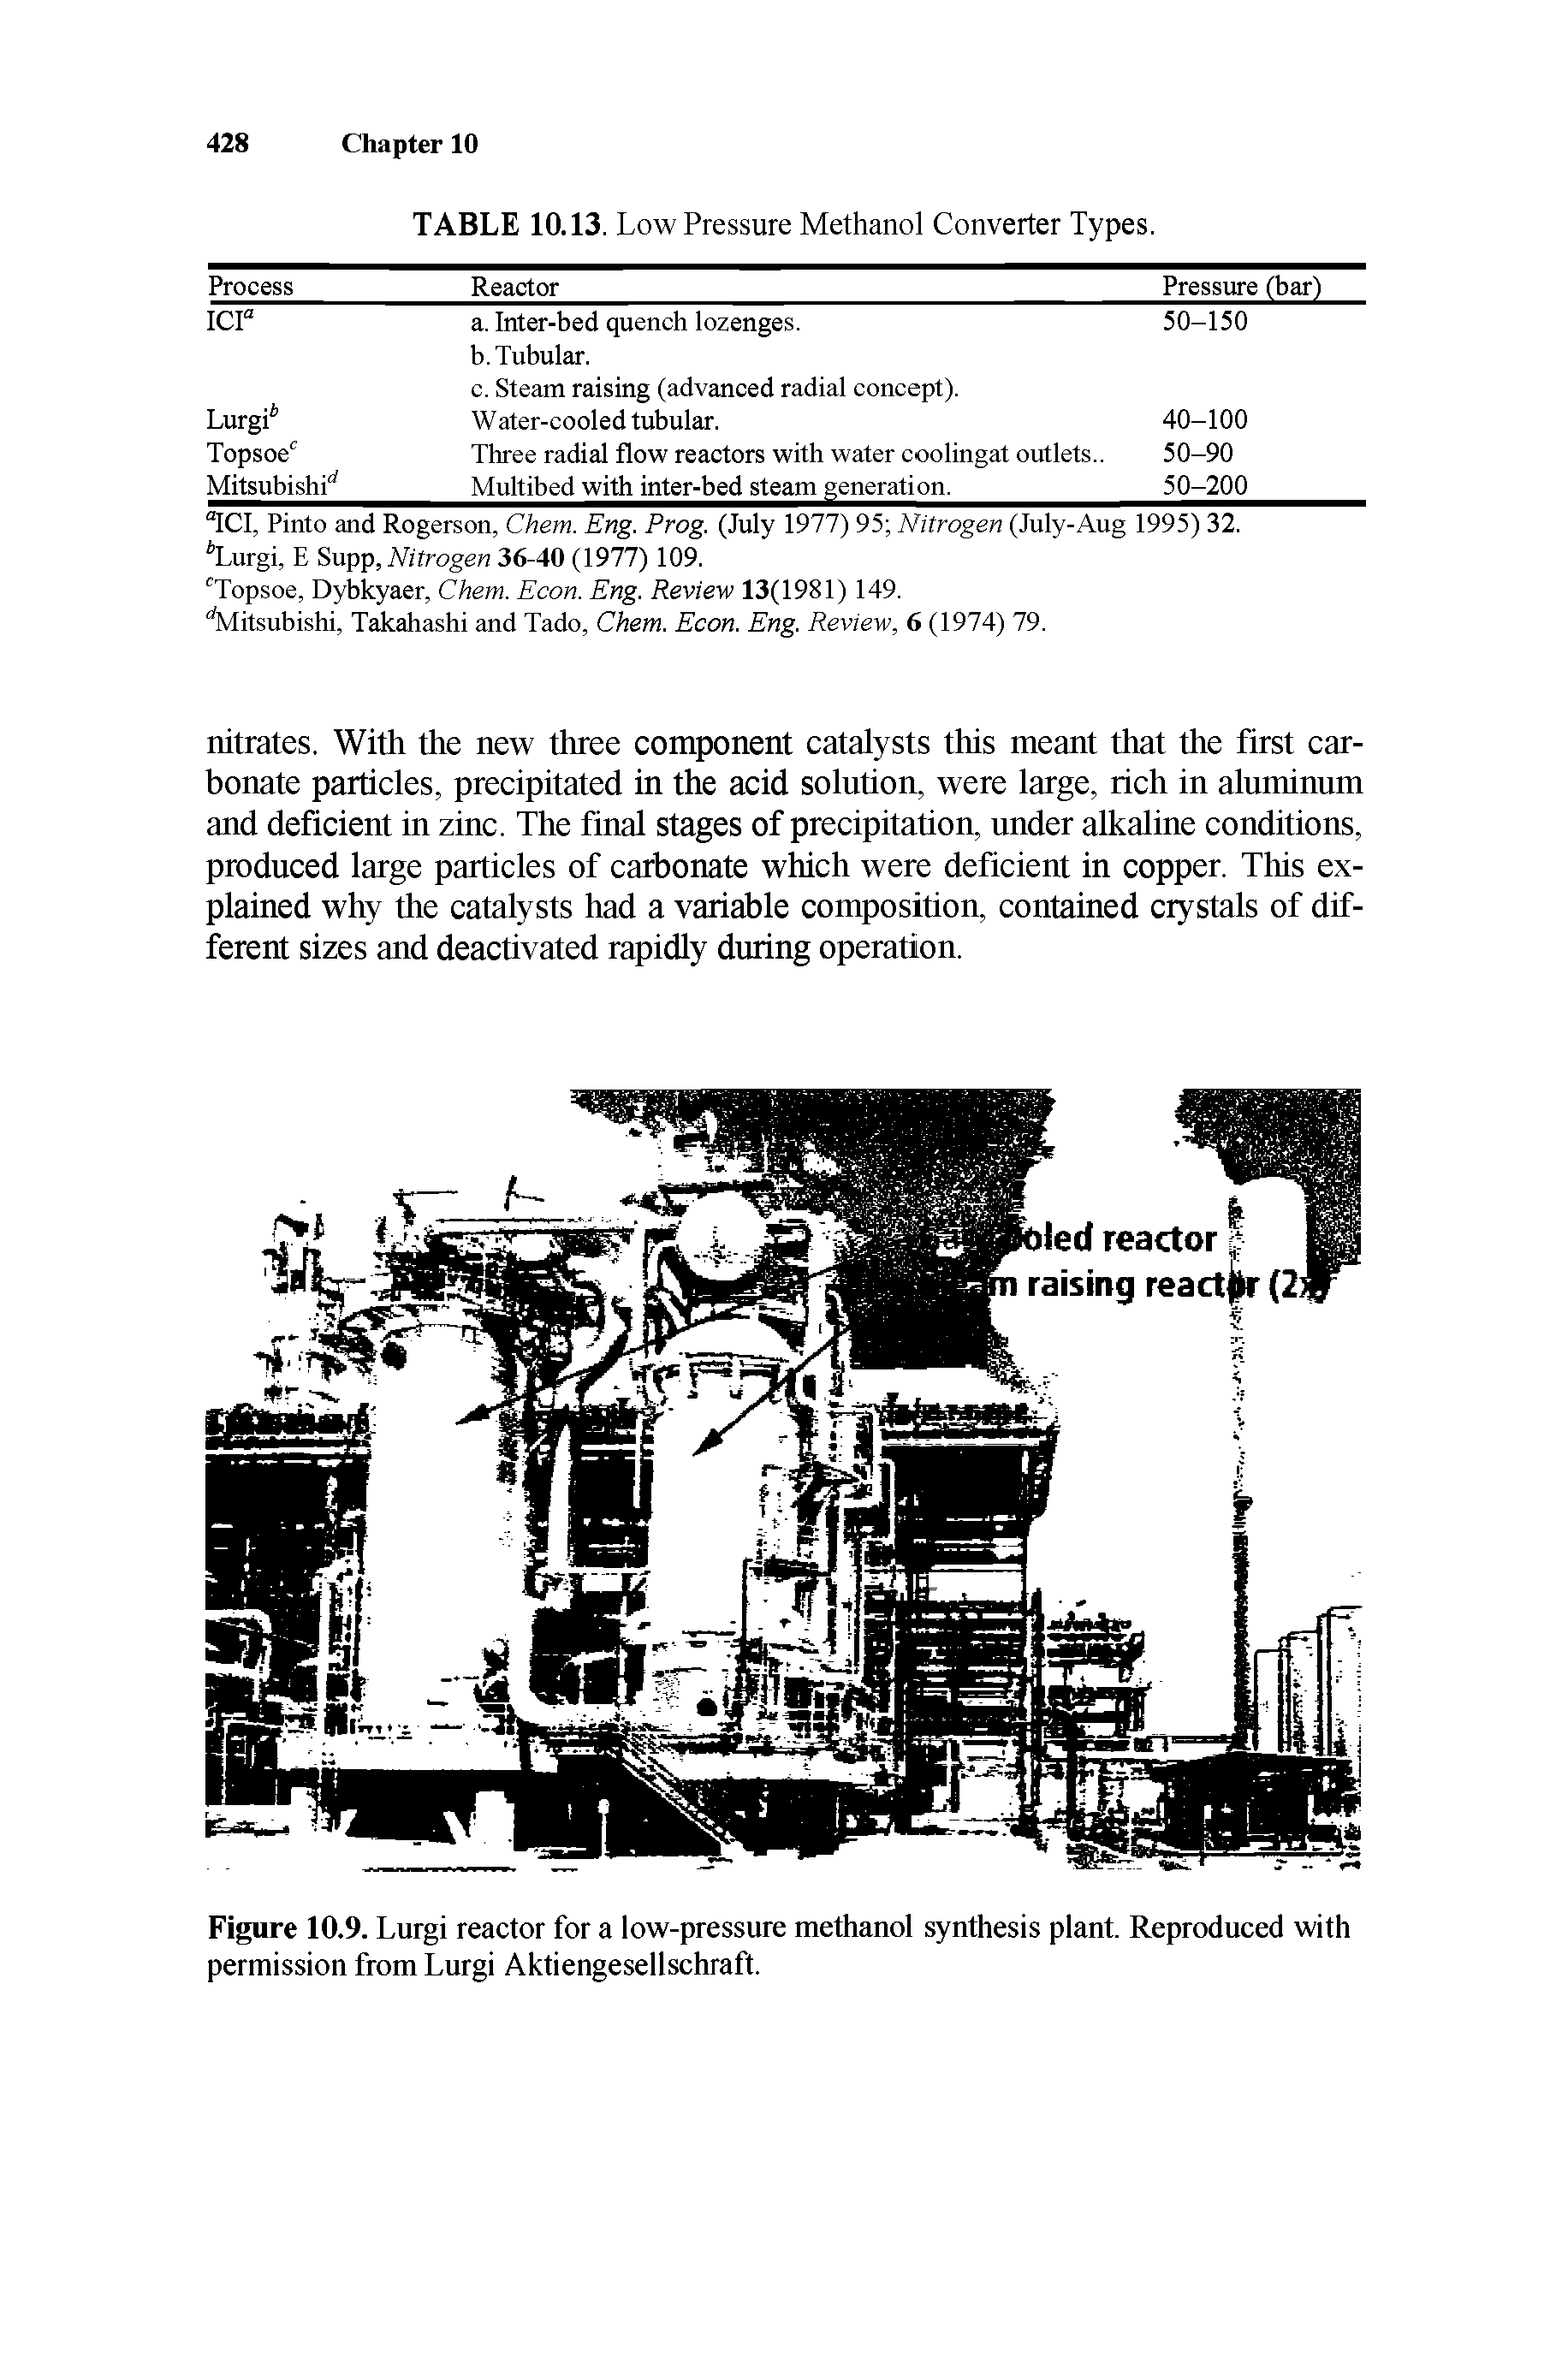 Figure 10.9. Lurgi reactor for a low-pressure methanol synthesis plant. Reproduced with permission from Lurgi Aktiengesellschraft.